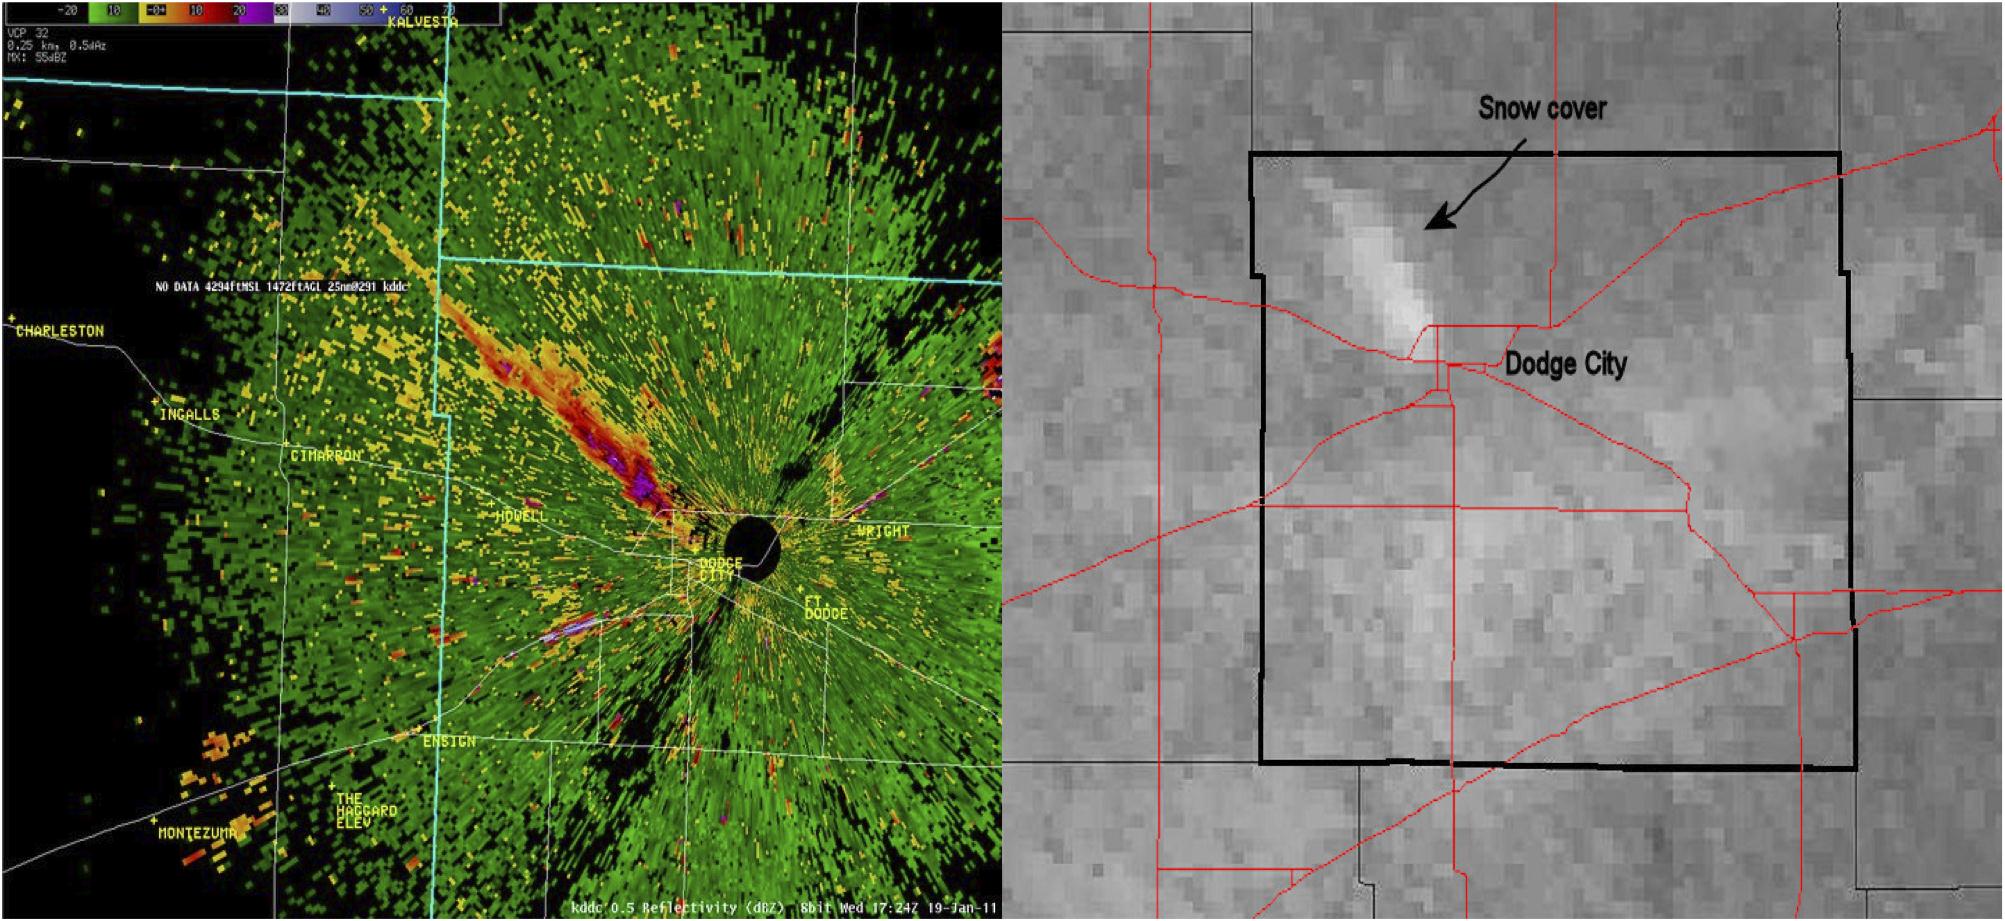 Figure 2: Dodge City unusual snow event. (a.) radar image at 1124 LST and (b) satellite image after the event. Source: National Weather Service.